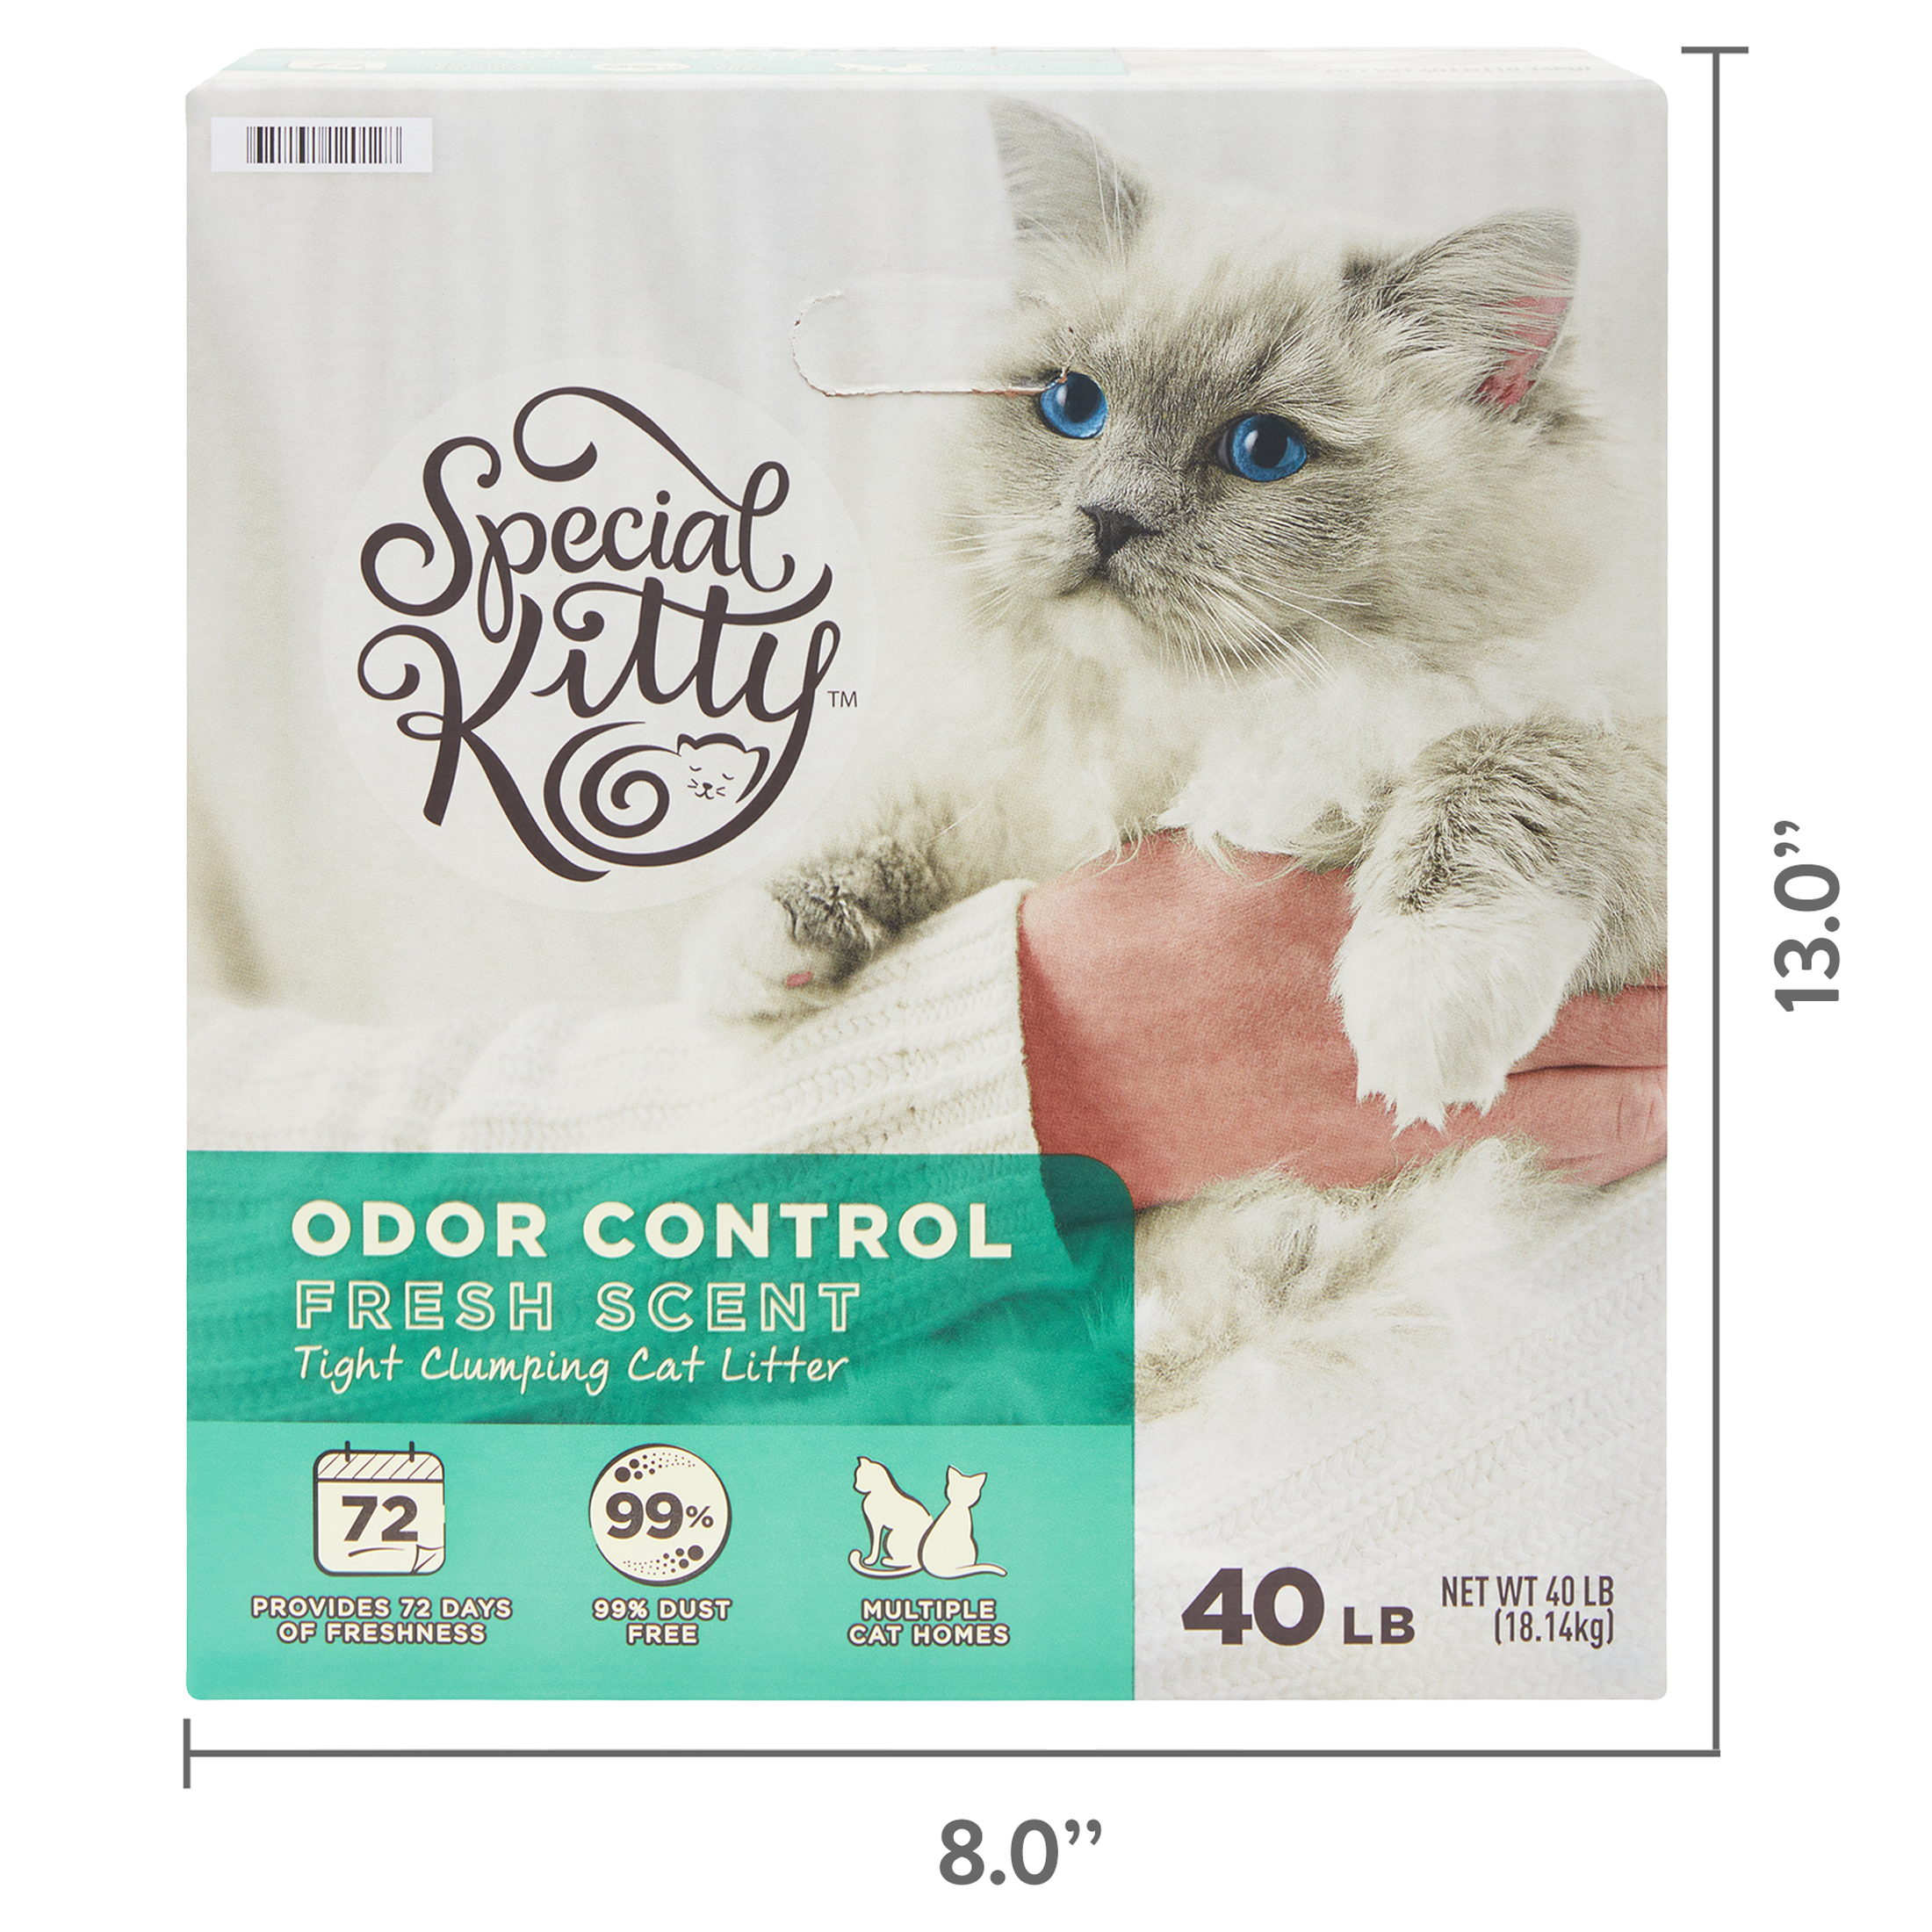 Fresh　40　Cat　lb　Special　Kitty　Tight　Control　Odor　Scent,　Clumping　Litter,